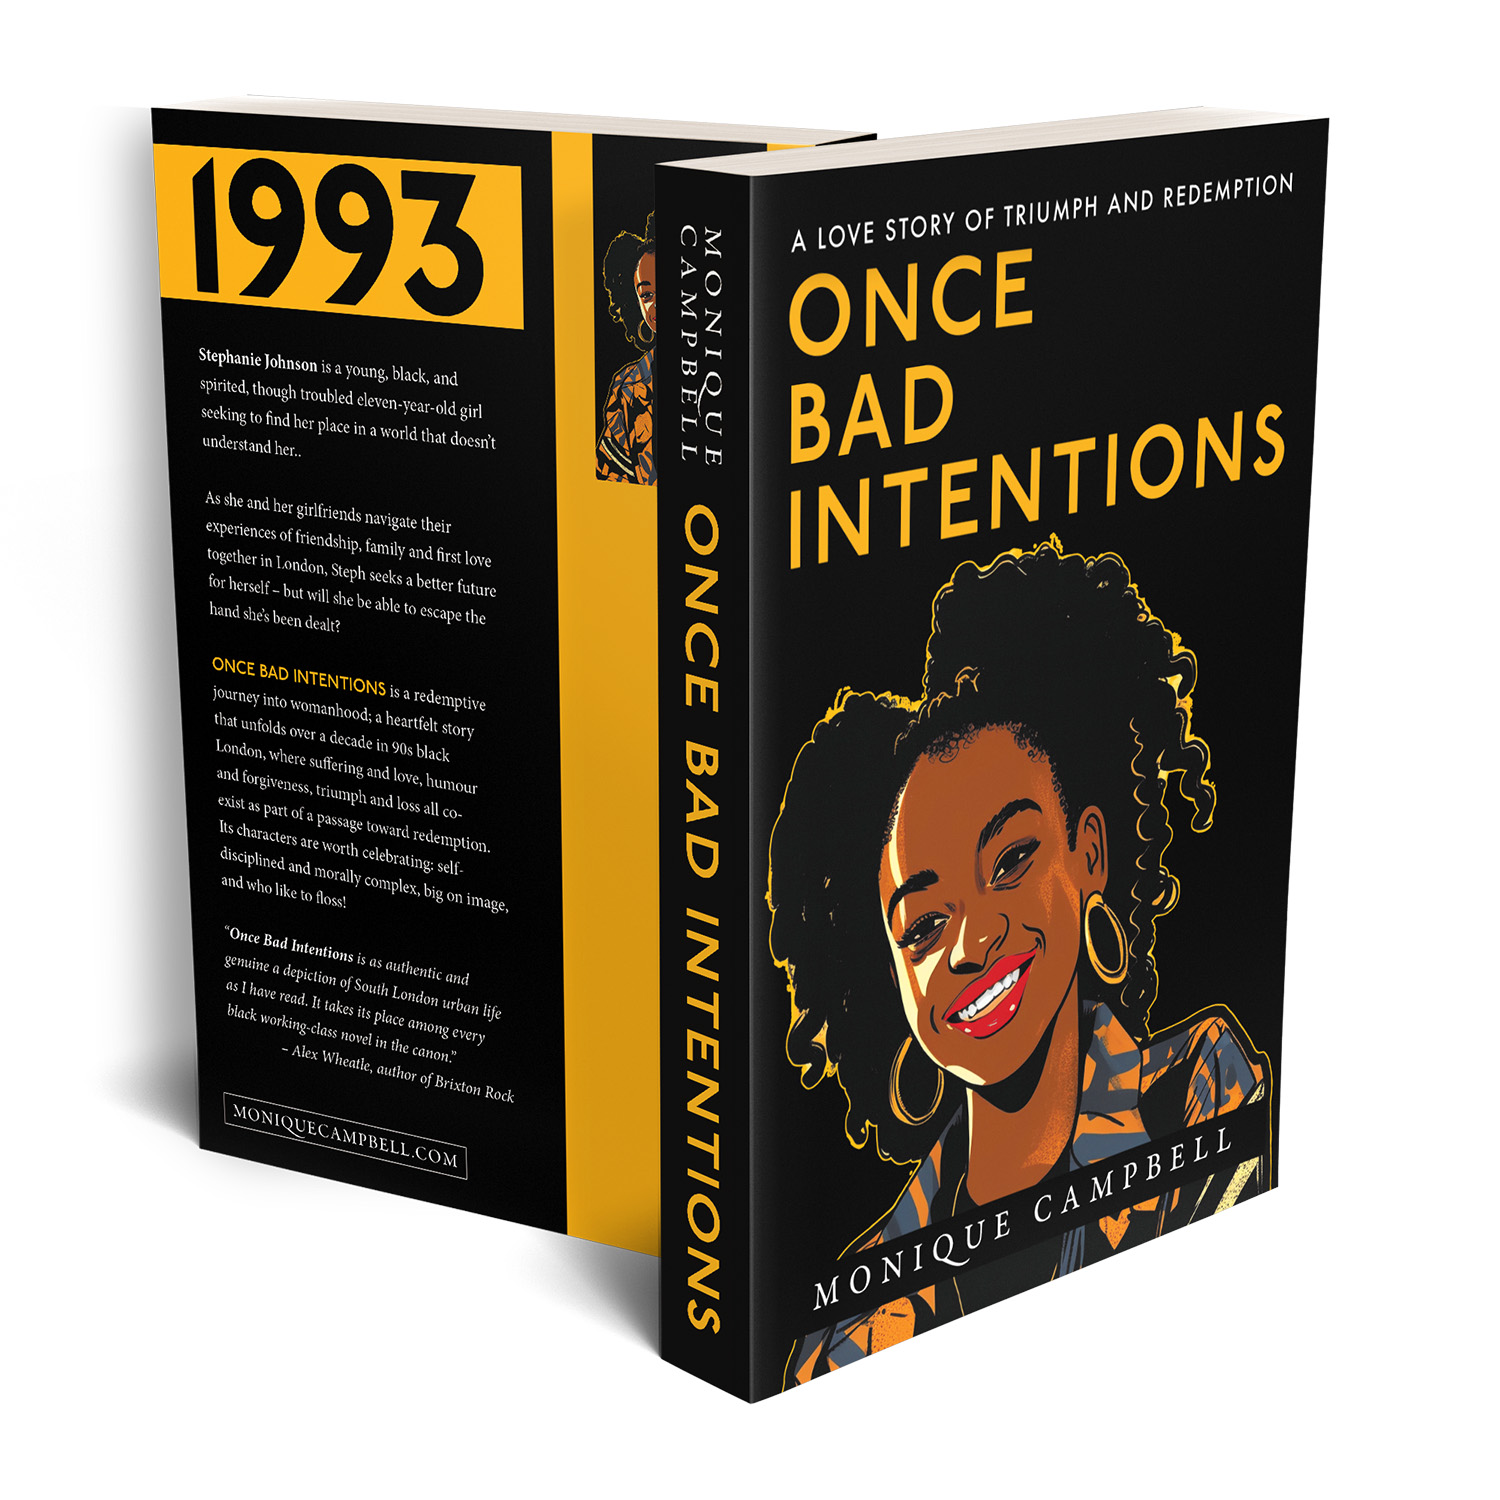 'Once Bad Intentions' is an immersive urban coming-of-age novel set in early 90s London. The author is Monique Campbell. The book cover and interior formatting were designed by Mark Thomas of coverness.com. To find out more about my book design services, please visit www.coverness.com